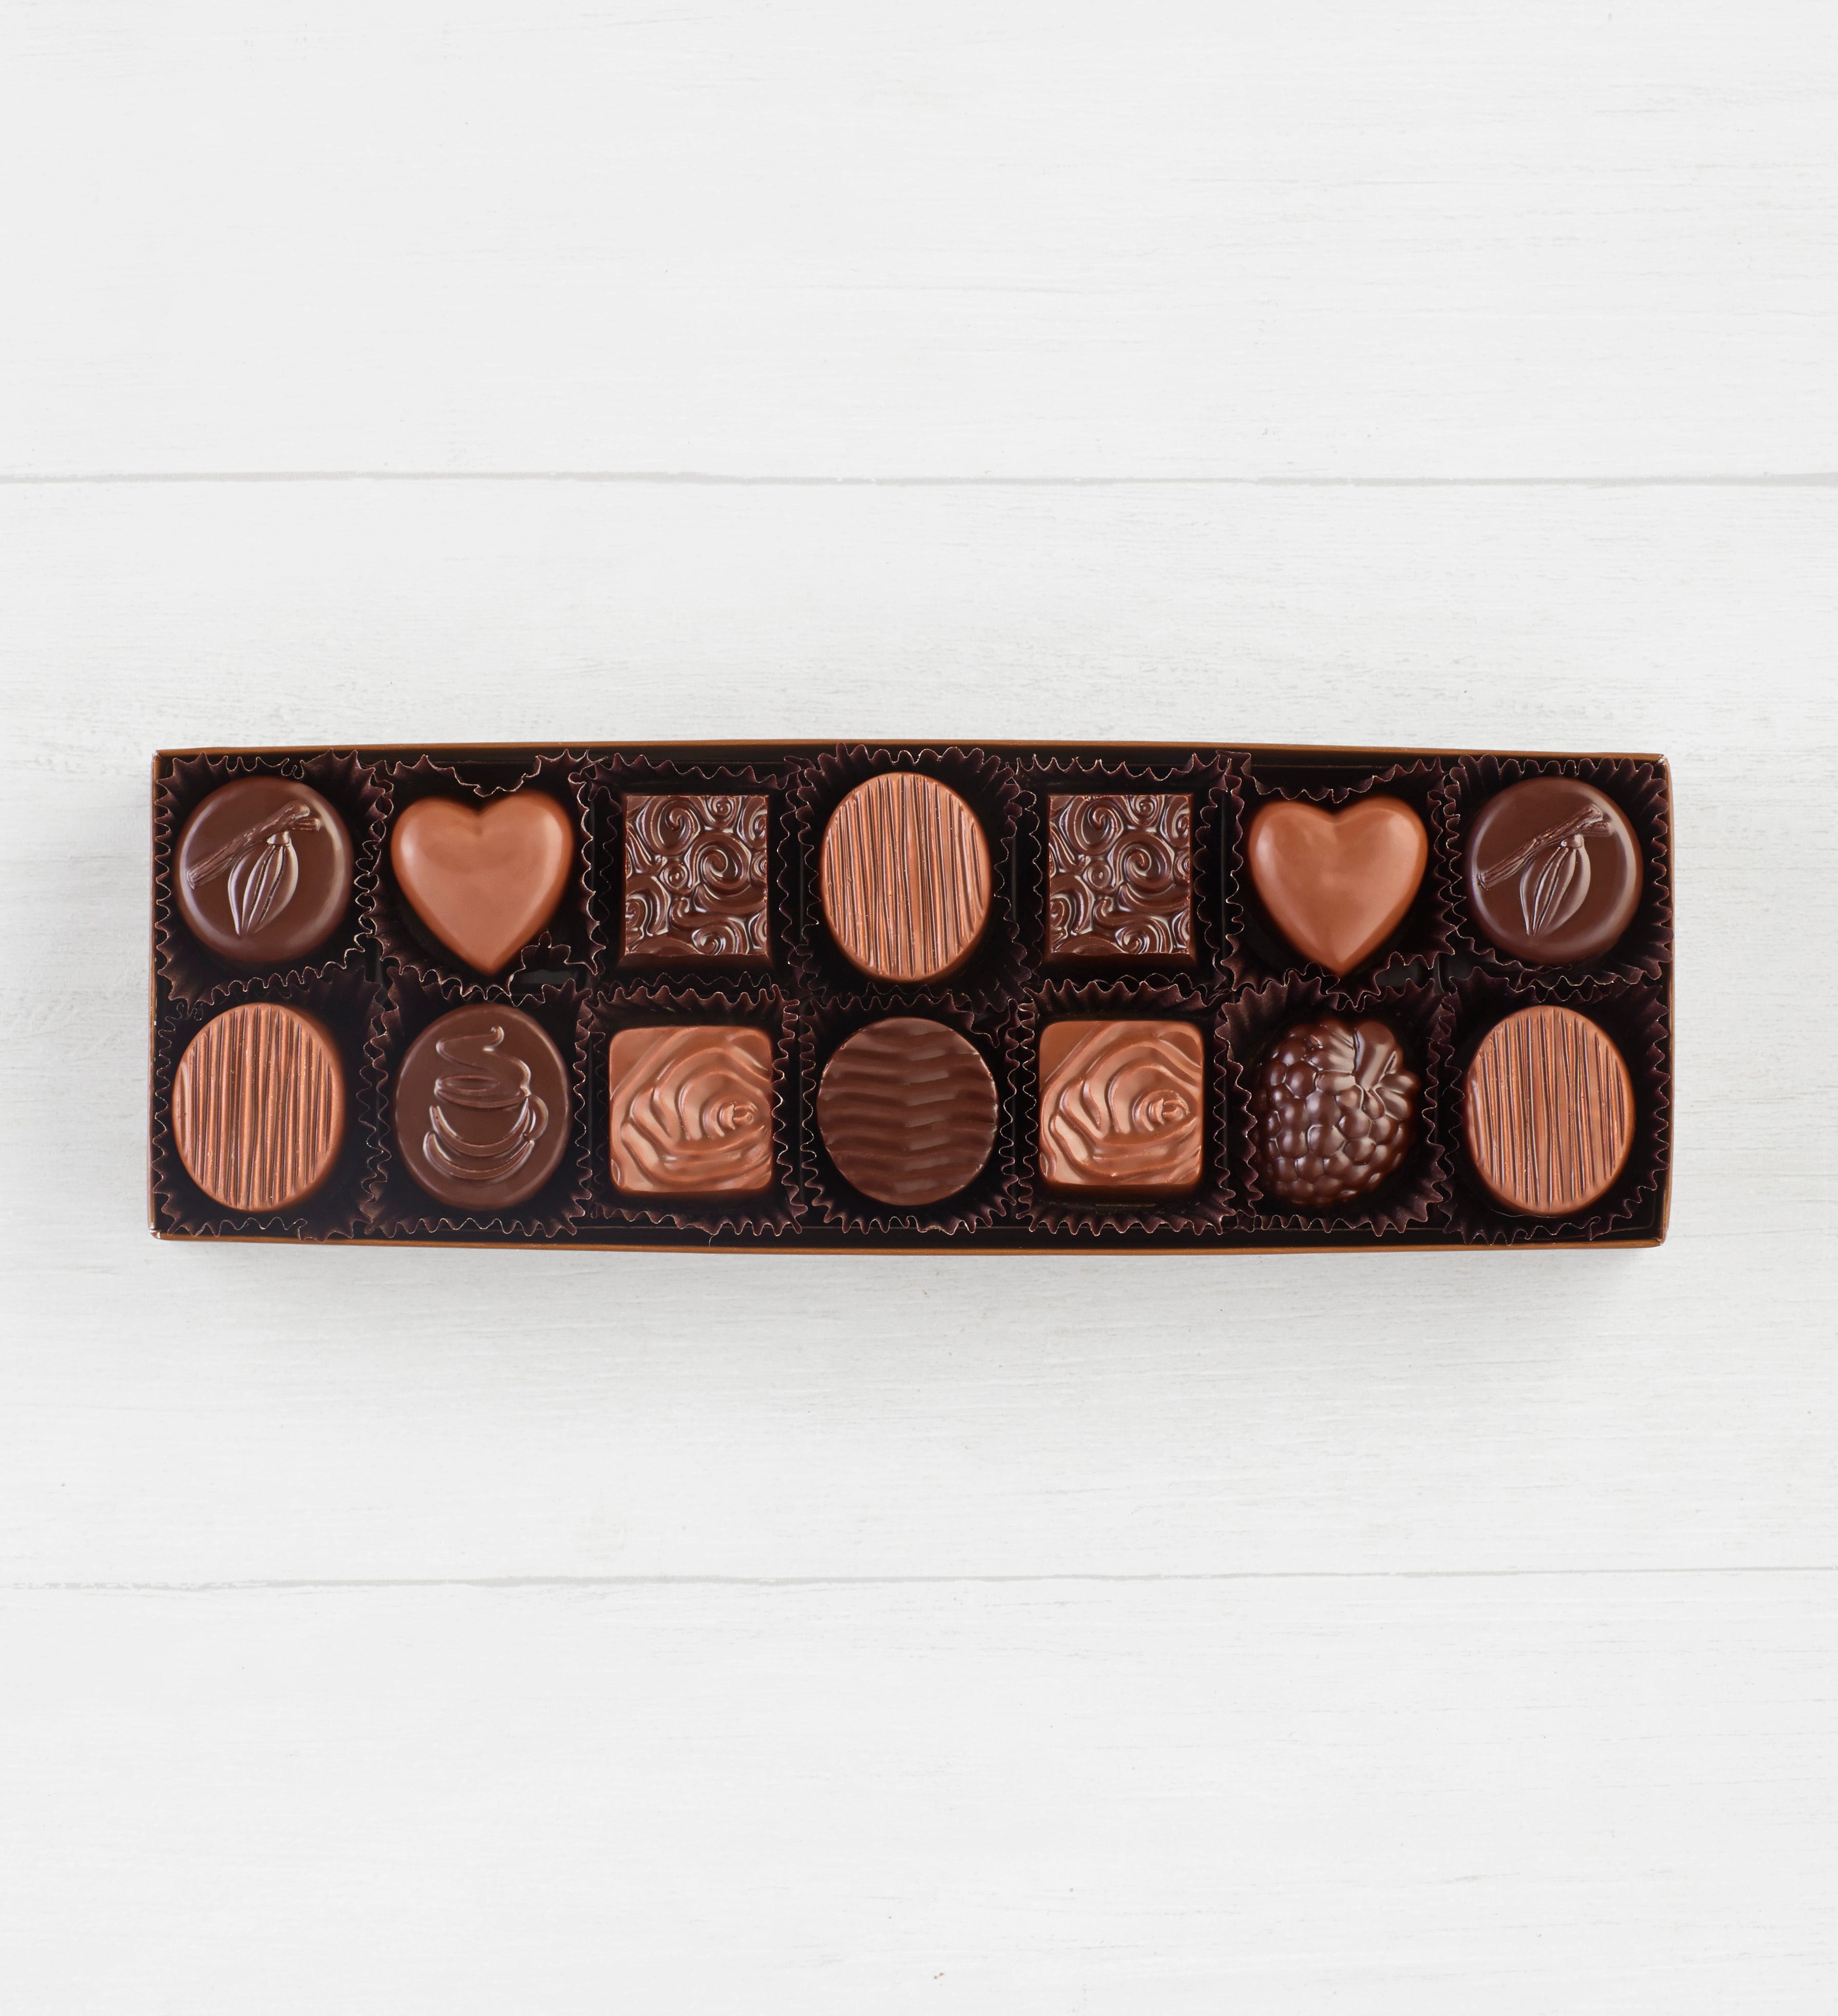 Simply Chocolate Premier Collection 14pc